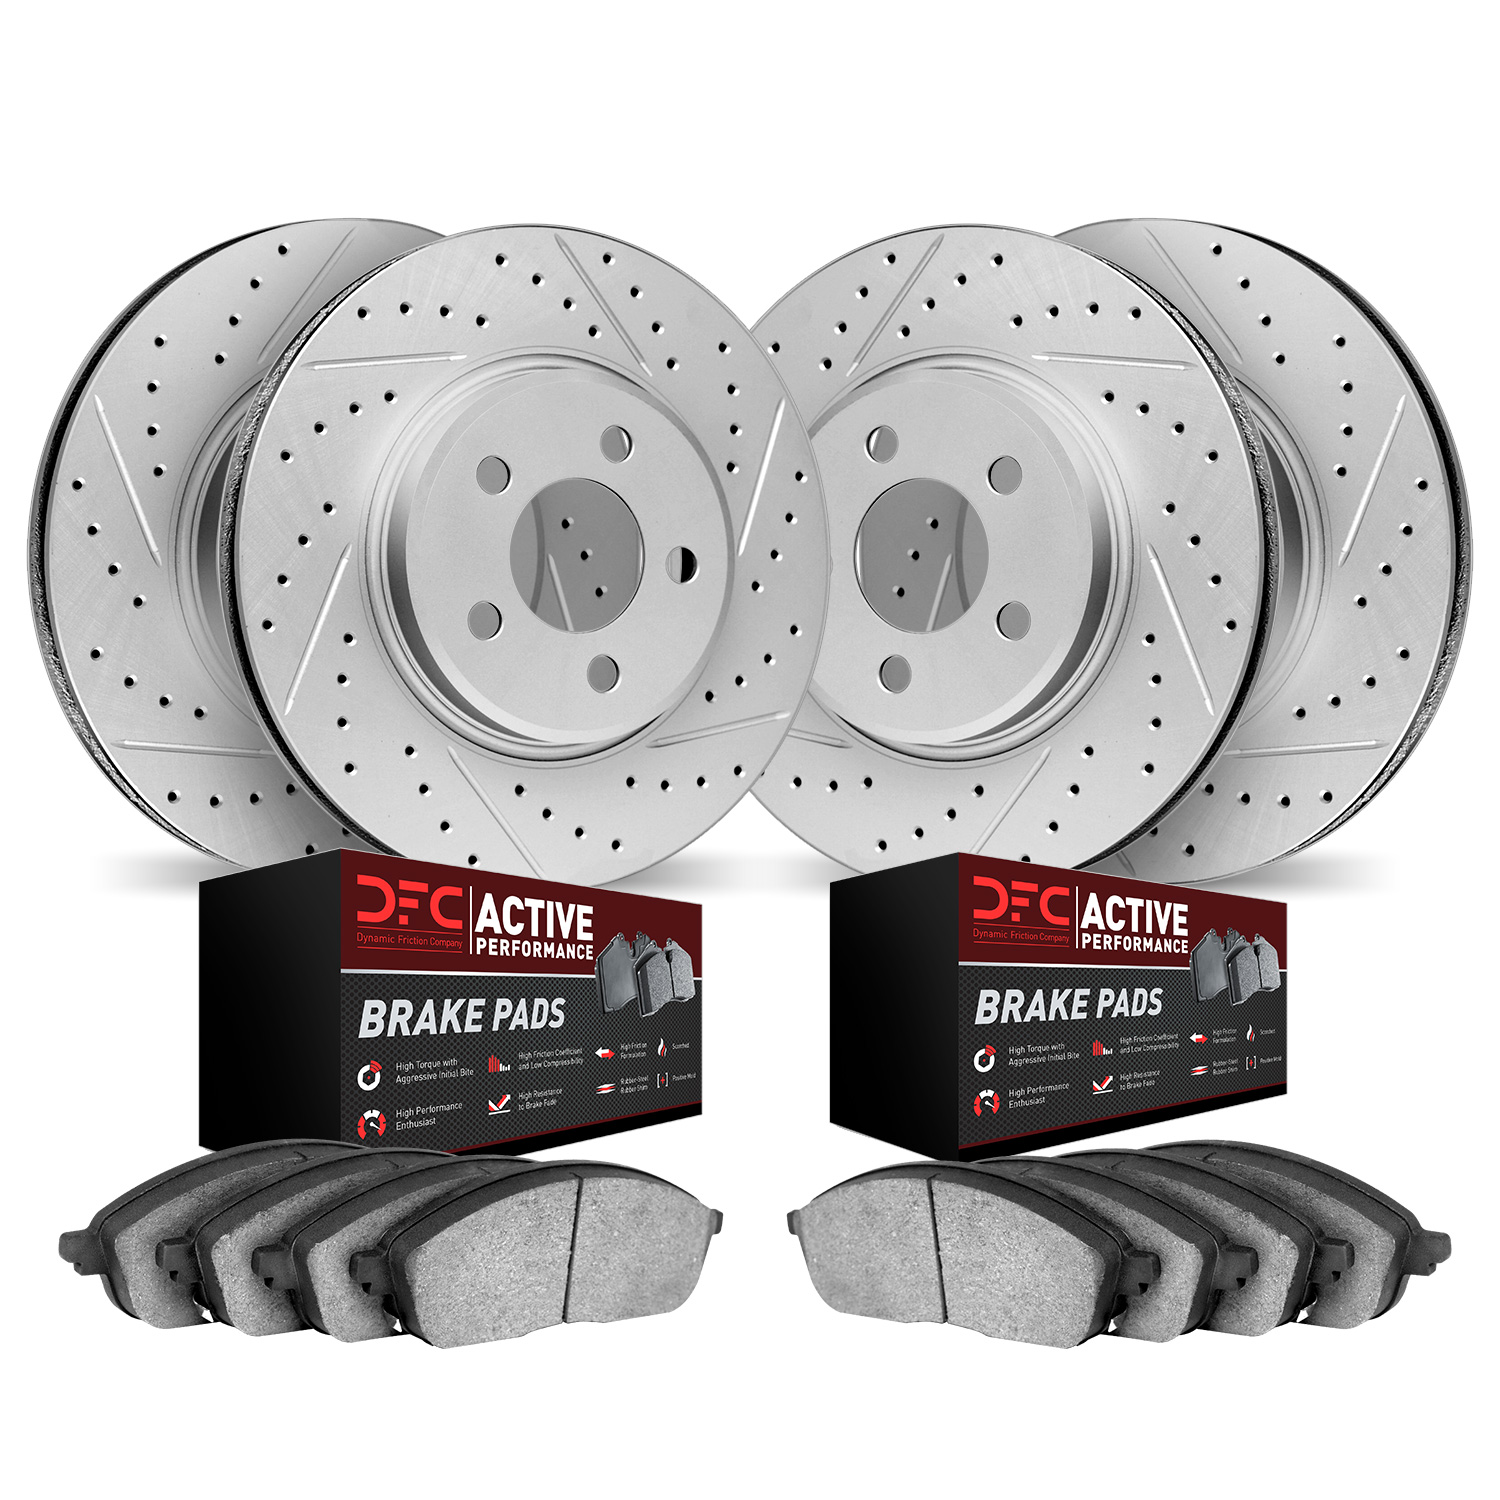 2704-31075 Geoperformance Drilled/Slotted Brake Rotors with Active Performance Pads Kit, 2007-2013 BMW, Position: Front and Rear